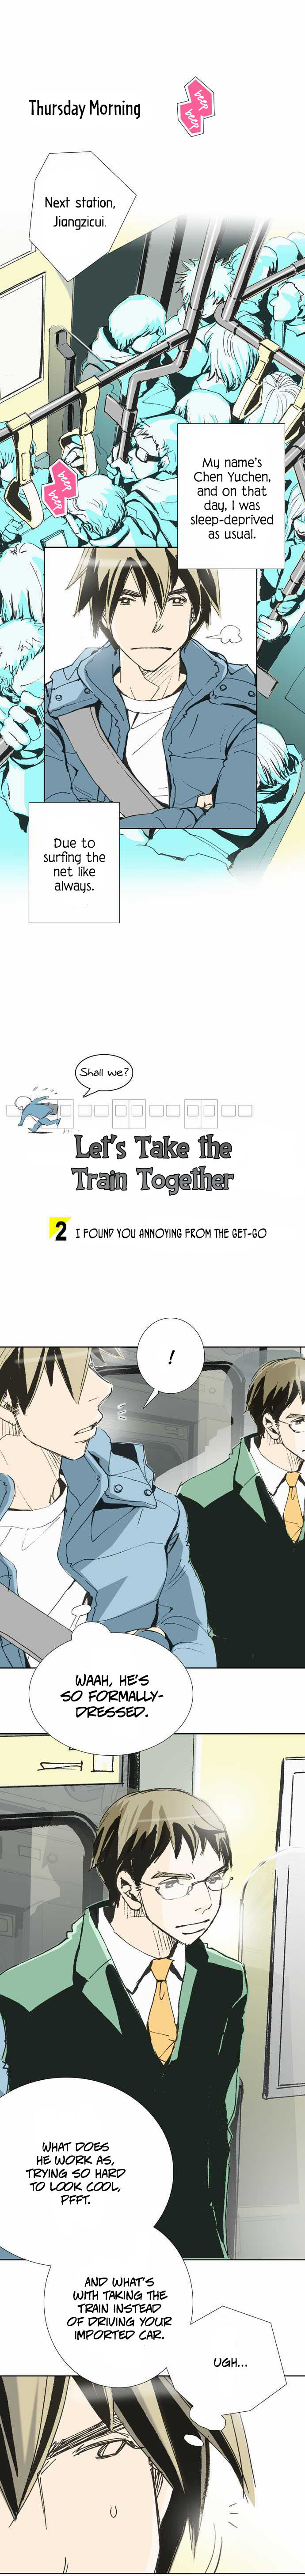 Let's Take the Train Together, Shall We? 2